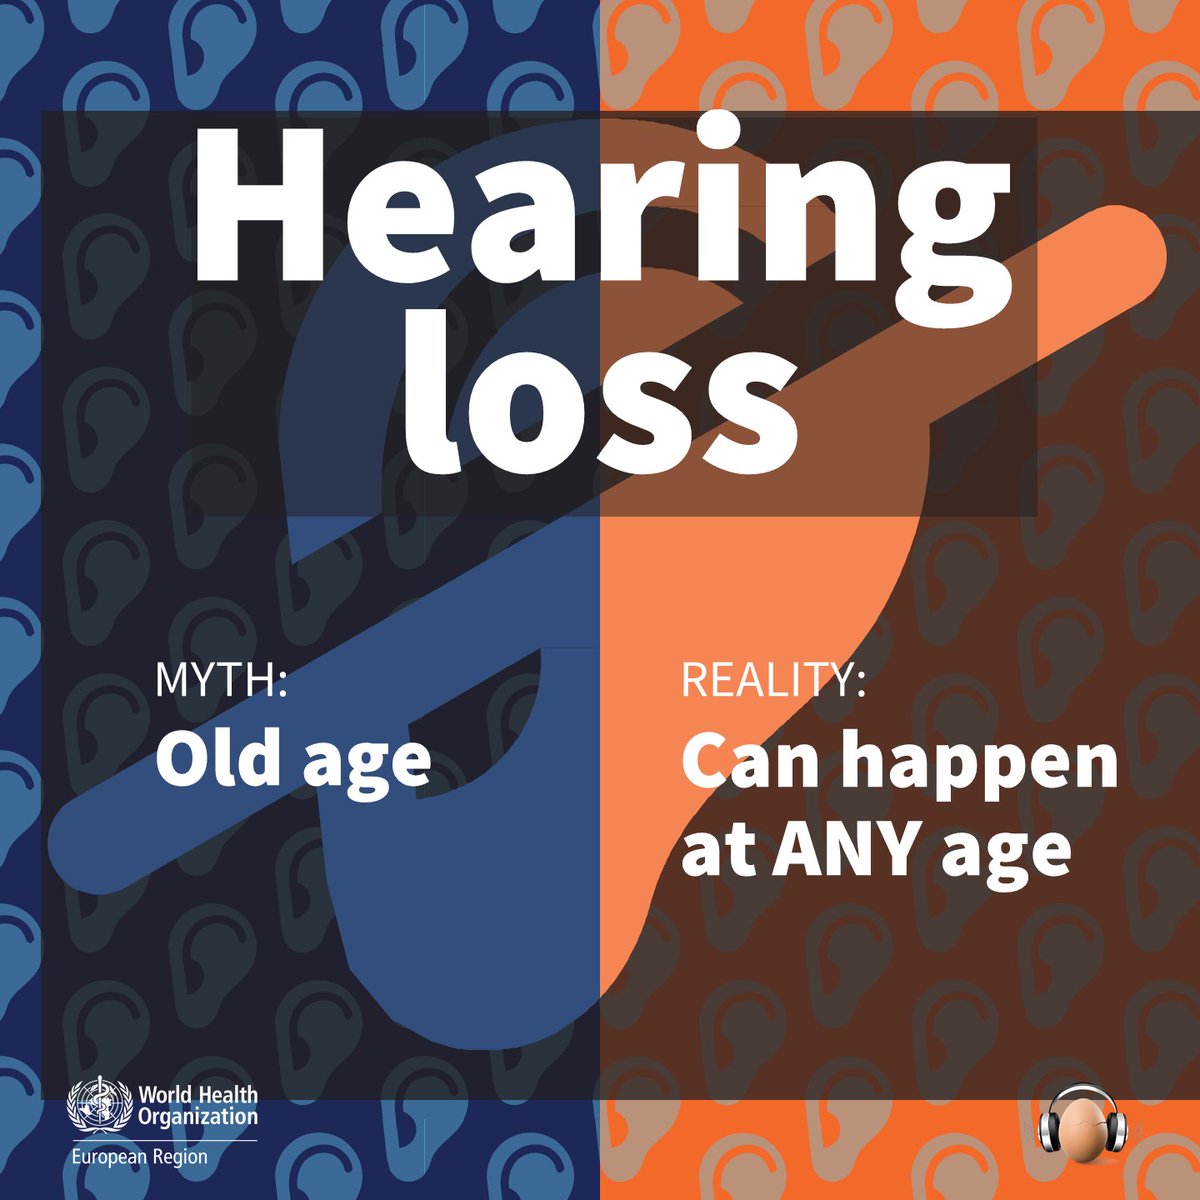 Changing mindsets is vital for improving access and mitigating the costs of untreated #HearingLoss. Learn more: who.int/europe/news-ro… #WorldHearingDay #HearingCare